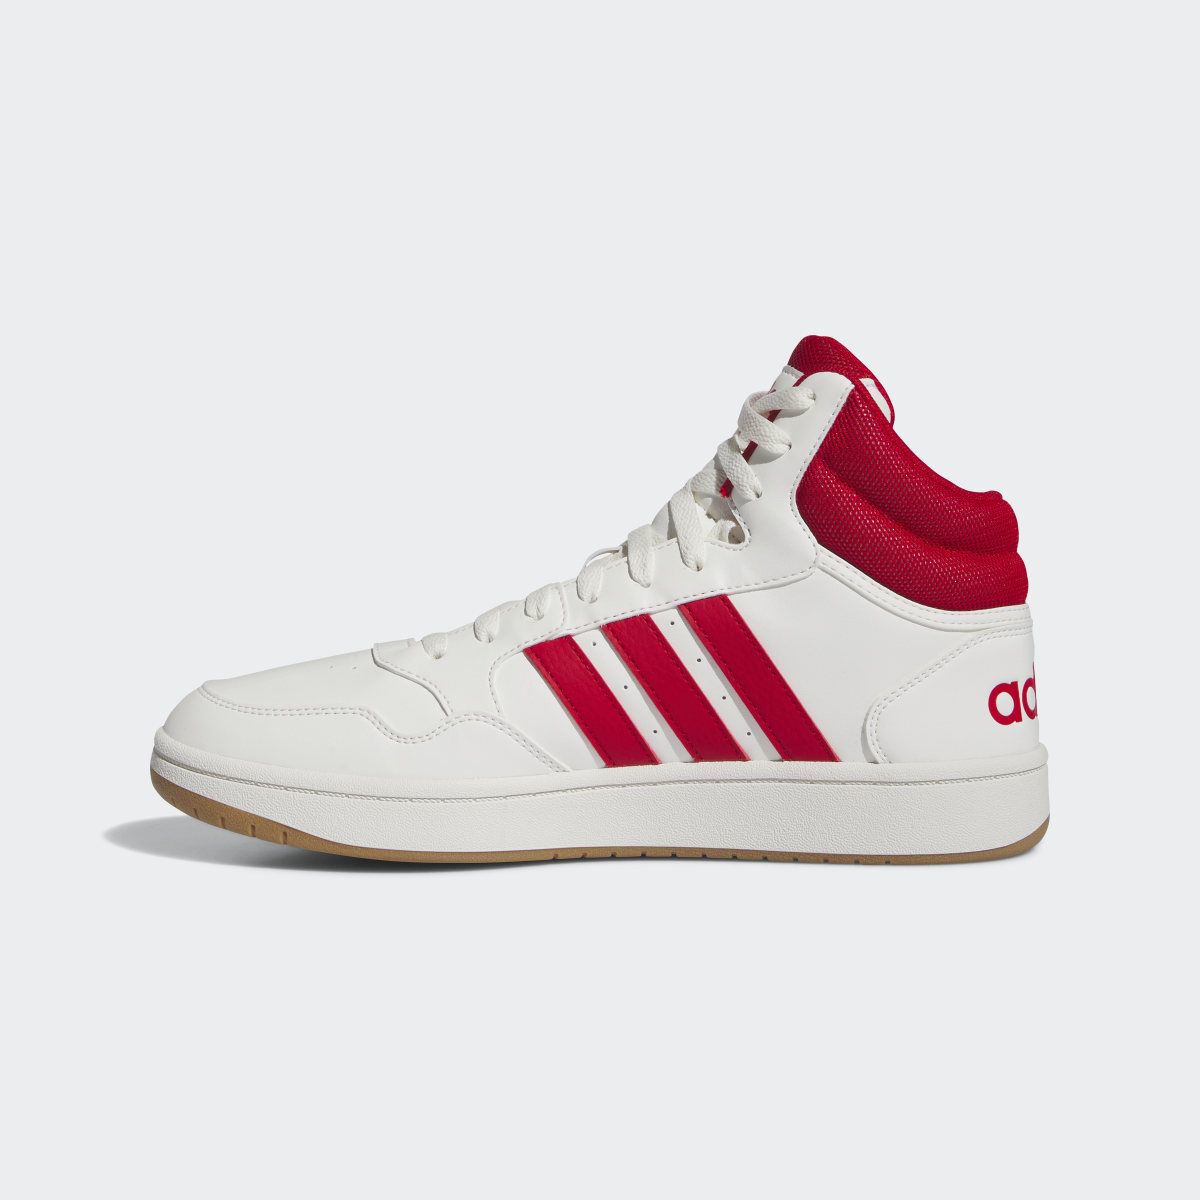 Adidas Chaussure Hoops 3.0 Mid Lifestyle Basketball Classic Vintage. 7